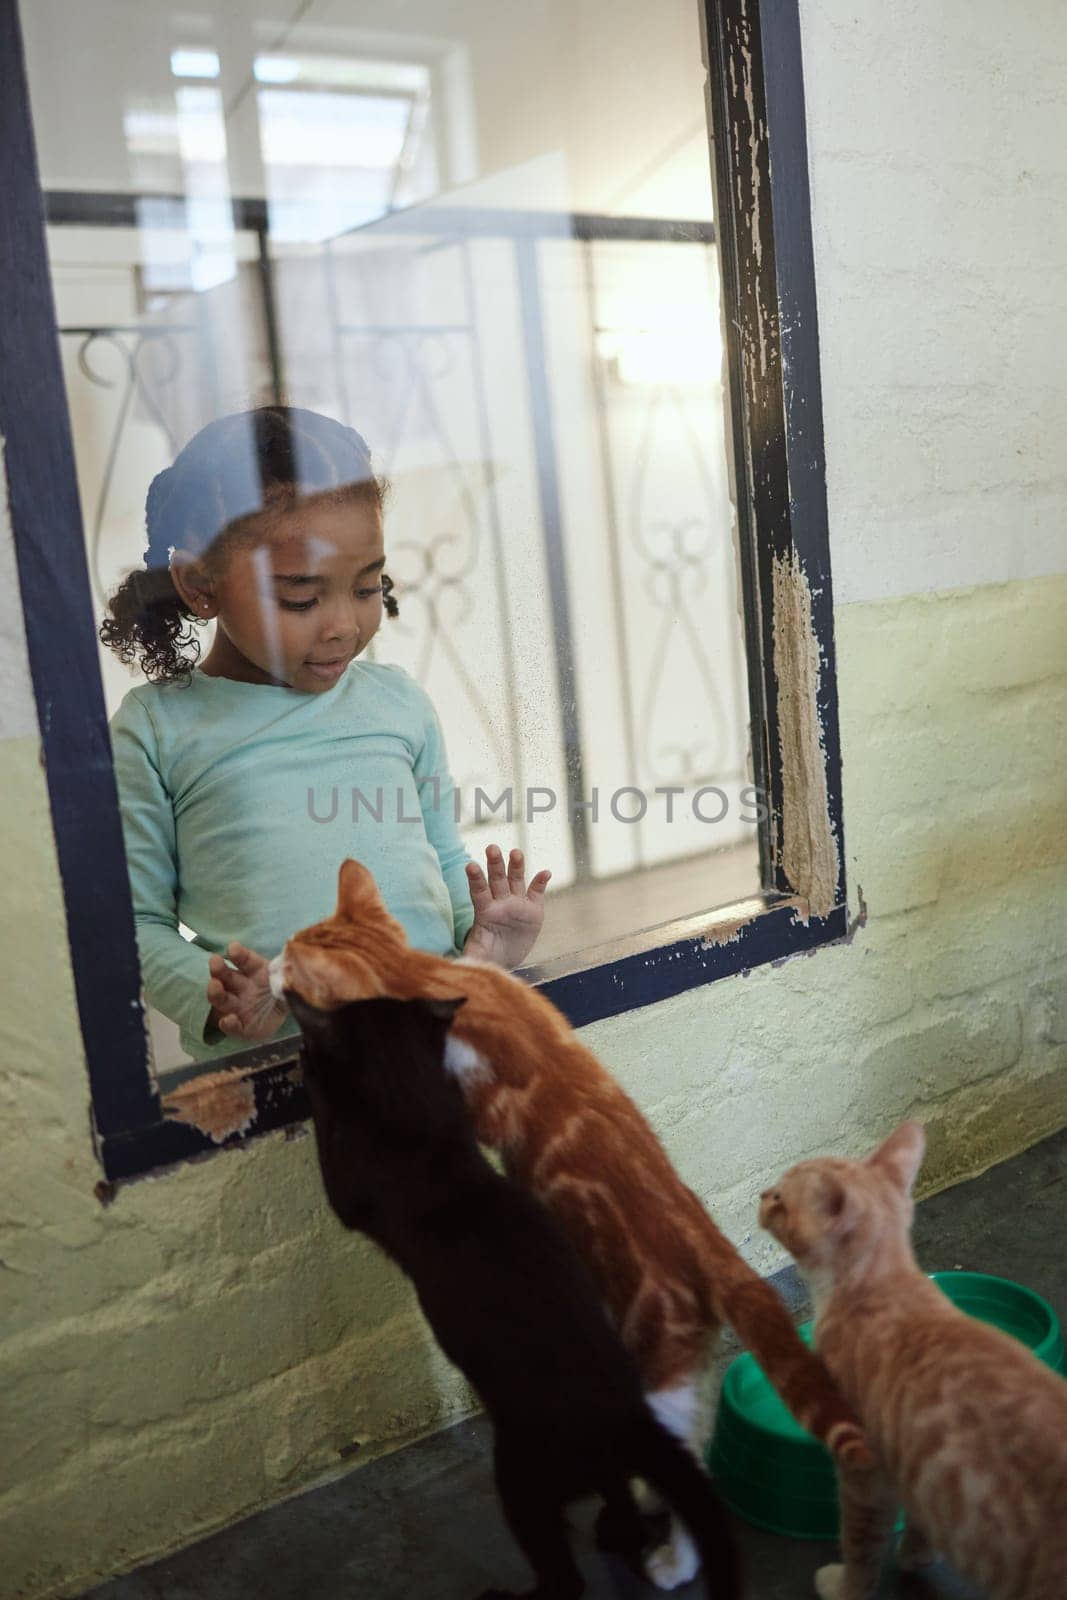 Child, girl or glass window of cat shopping in animal shelter, feline community charity or homeless rescue animals development. Kittens, cats or pets adoption foster, curious kid or volunteer youth by YuriArcurs